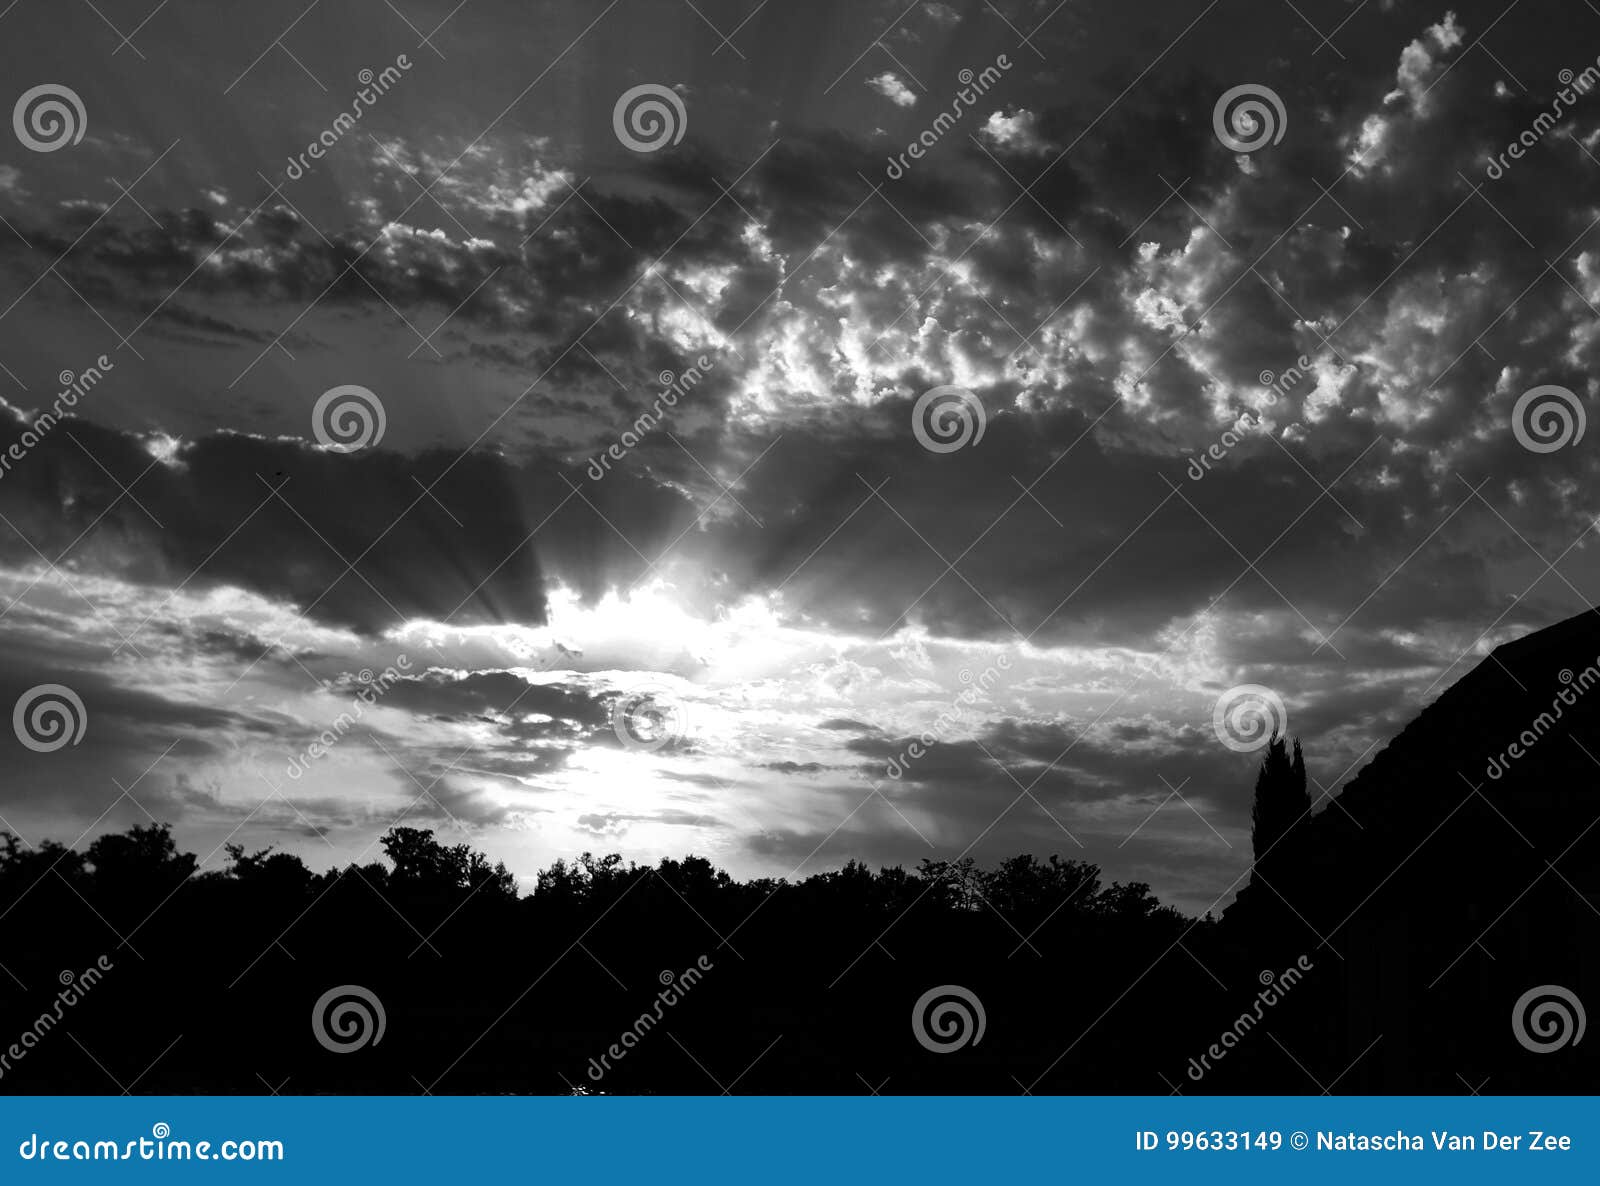 dreamy sunset above lake alicourts pierrefitte france black and white